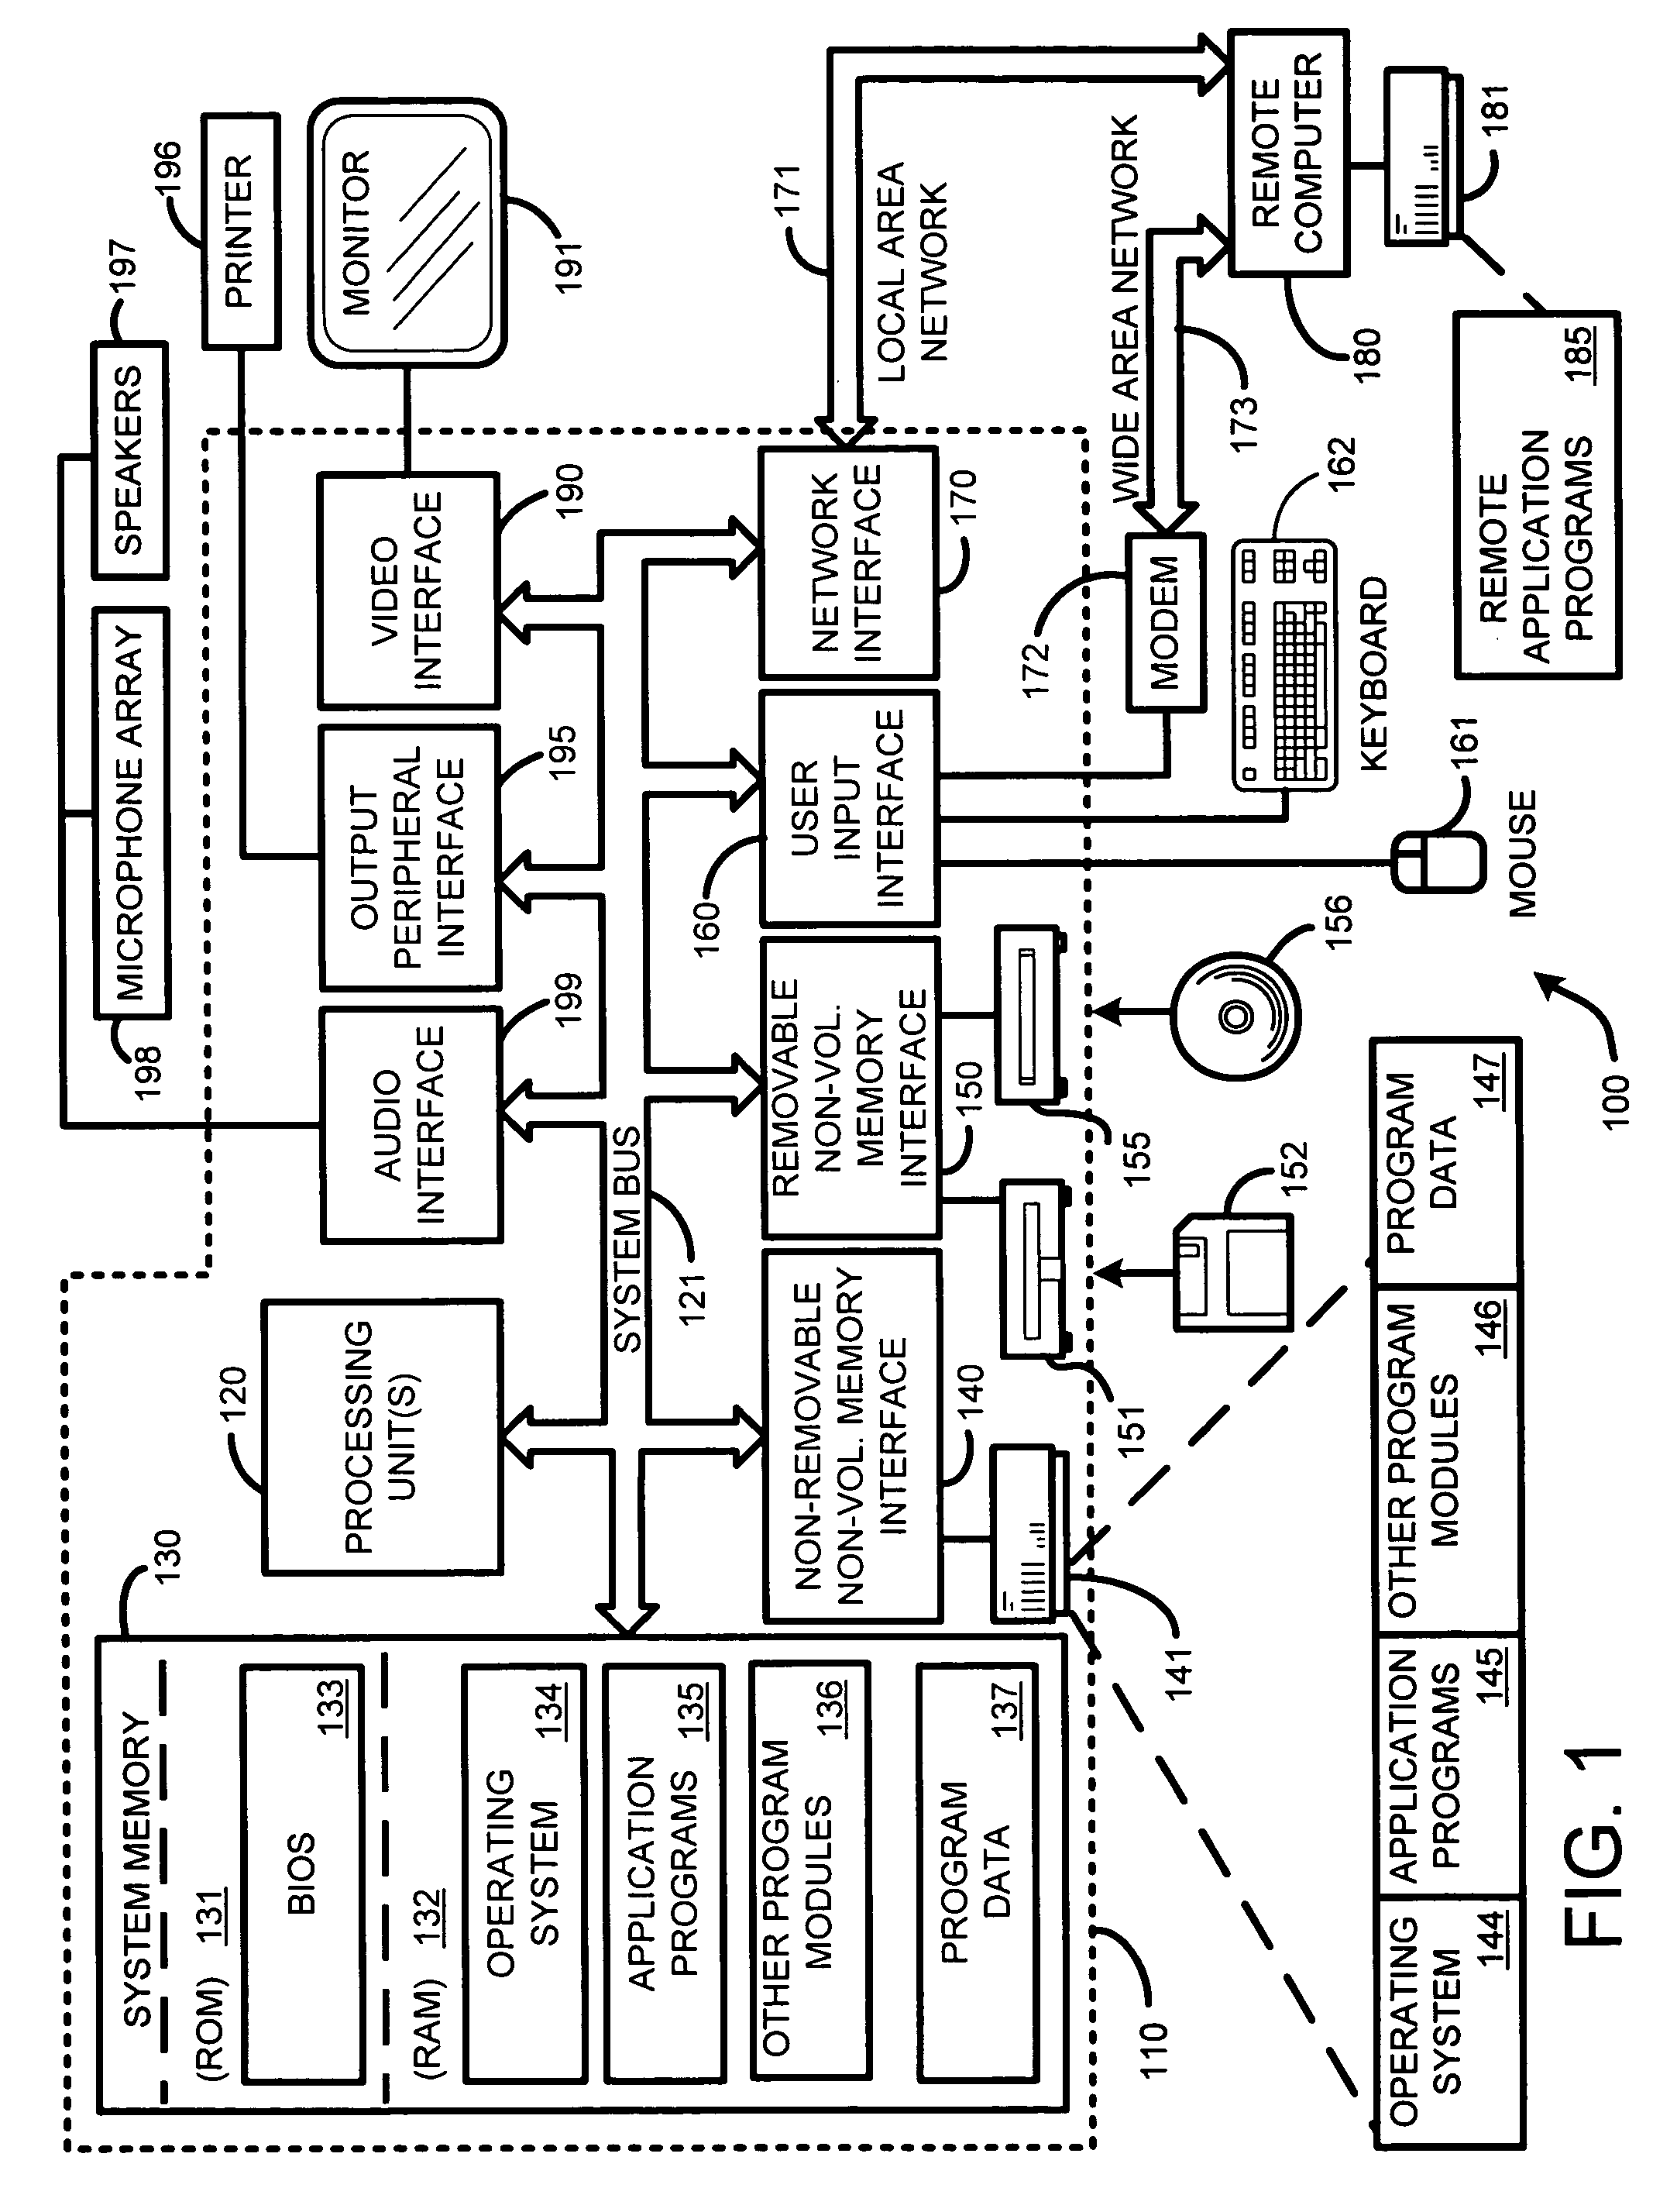 System and method for beamforming using a microphone array